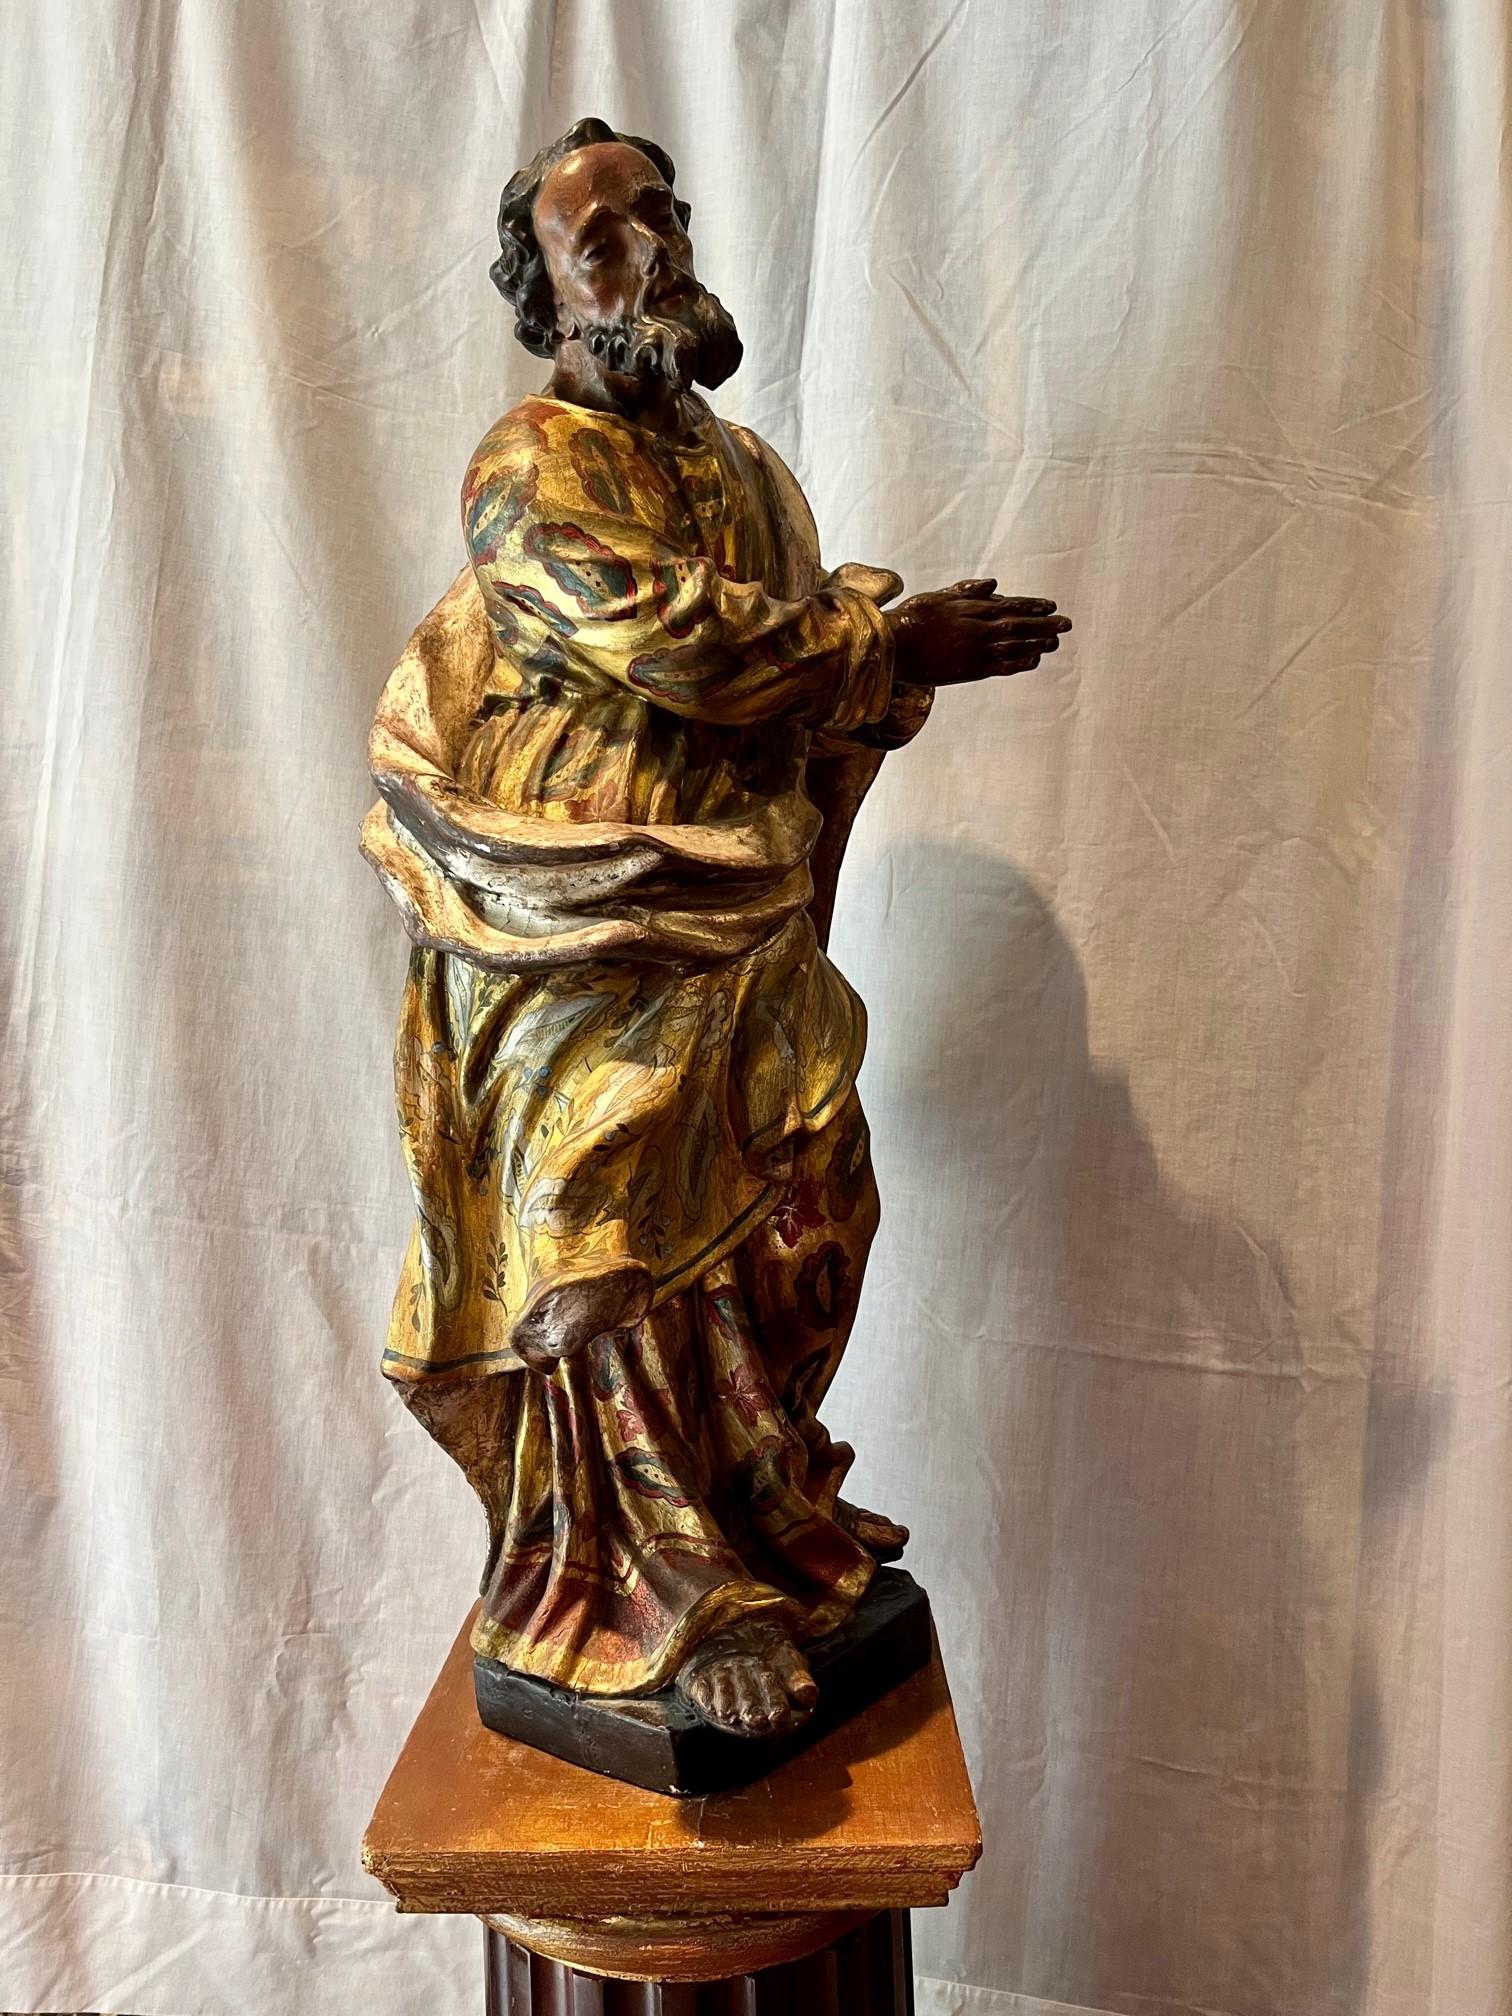 Large Saint John the Evangelist figure created in the workshop of Franz Matthias Hiernle in Mainz, Germany. The superbly carved and highly decorated slender figure, in an elegant and balanced posture with one foot forward, is wrapped in a decorative